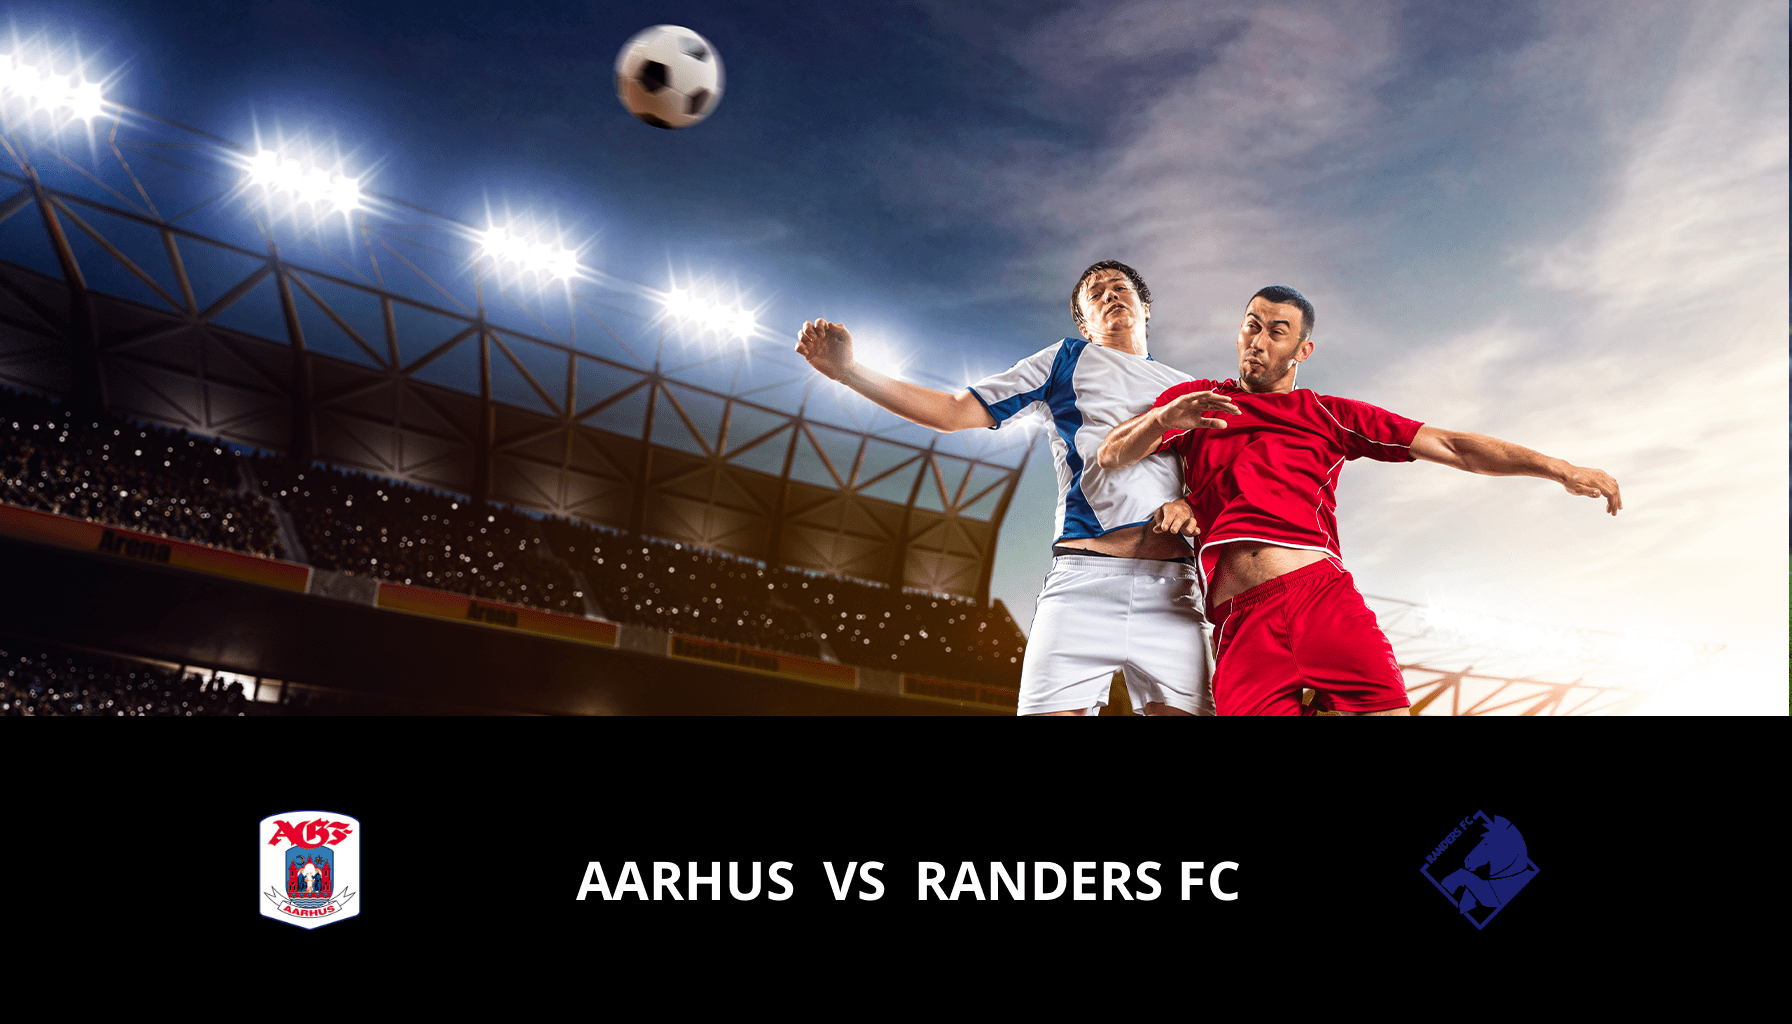 Previsione per Aarhus VS Randers FC il 30/10/2023 Analysis of the match